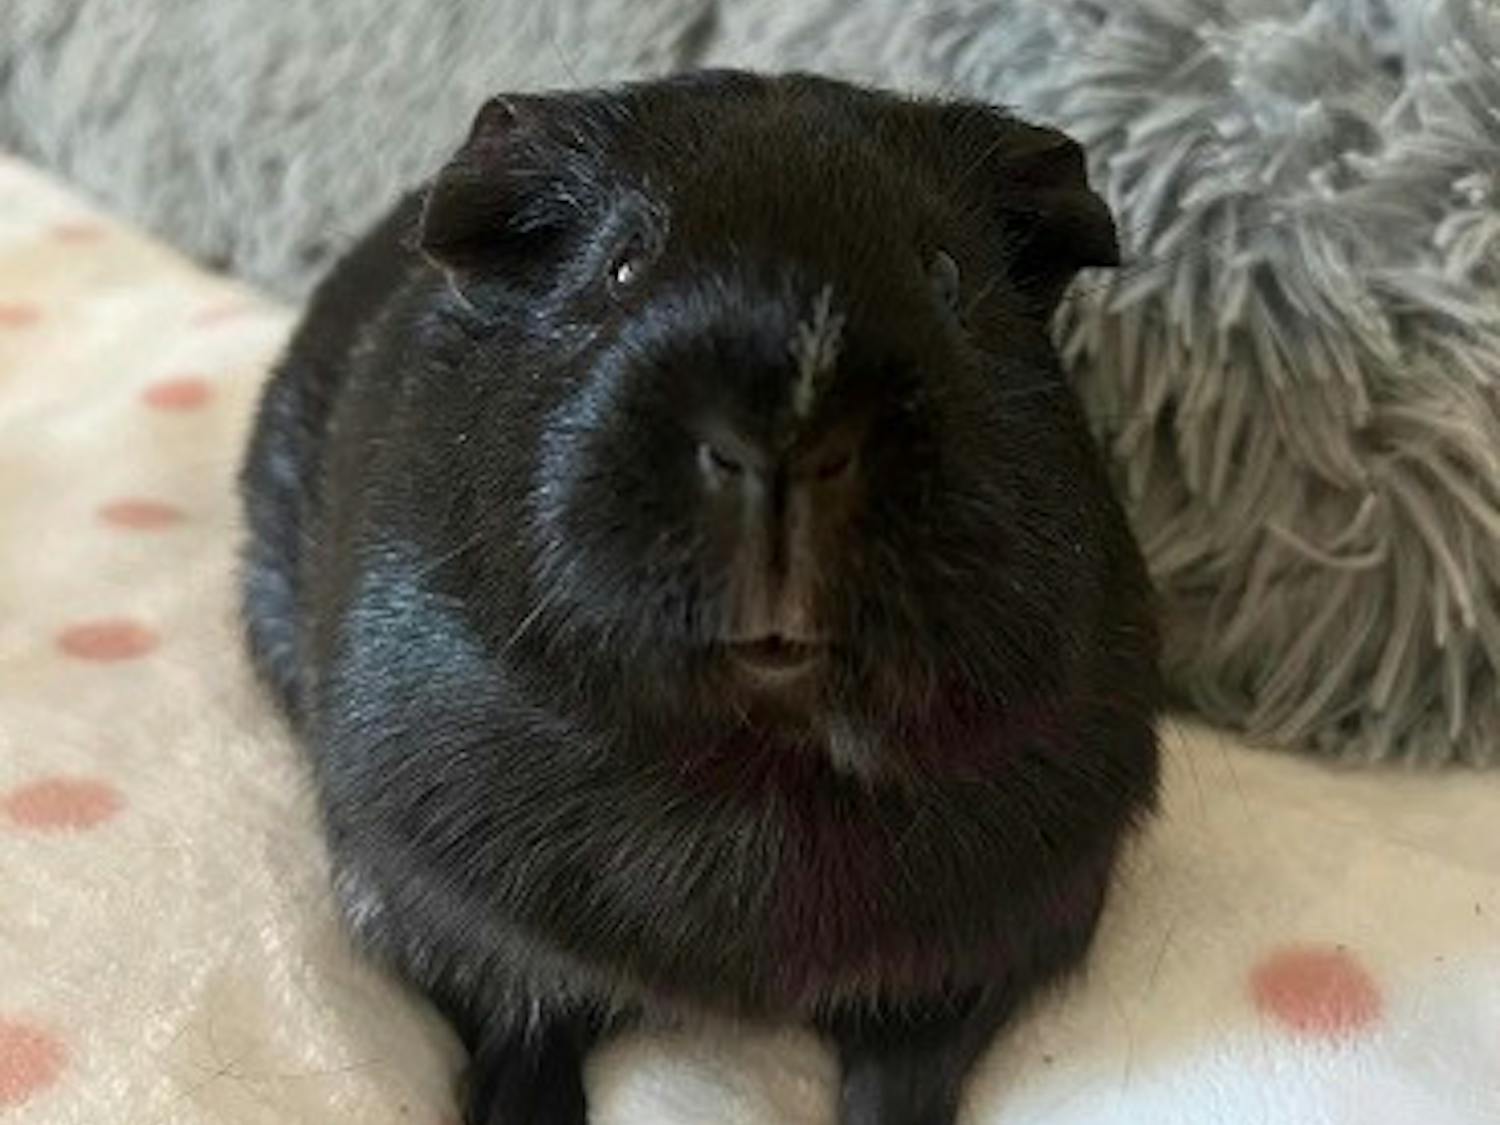 From Cleo the guinea pig, pictured, to Dinner the hamster, students at the College have turned to furry friends who offer a comforting reminder of home and a source of joy and connection (Photo courtesy of Natalia Revill).